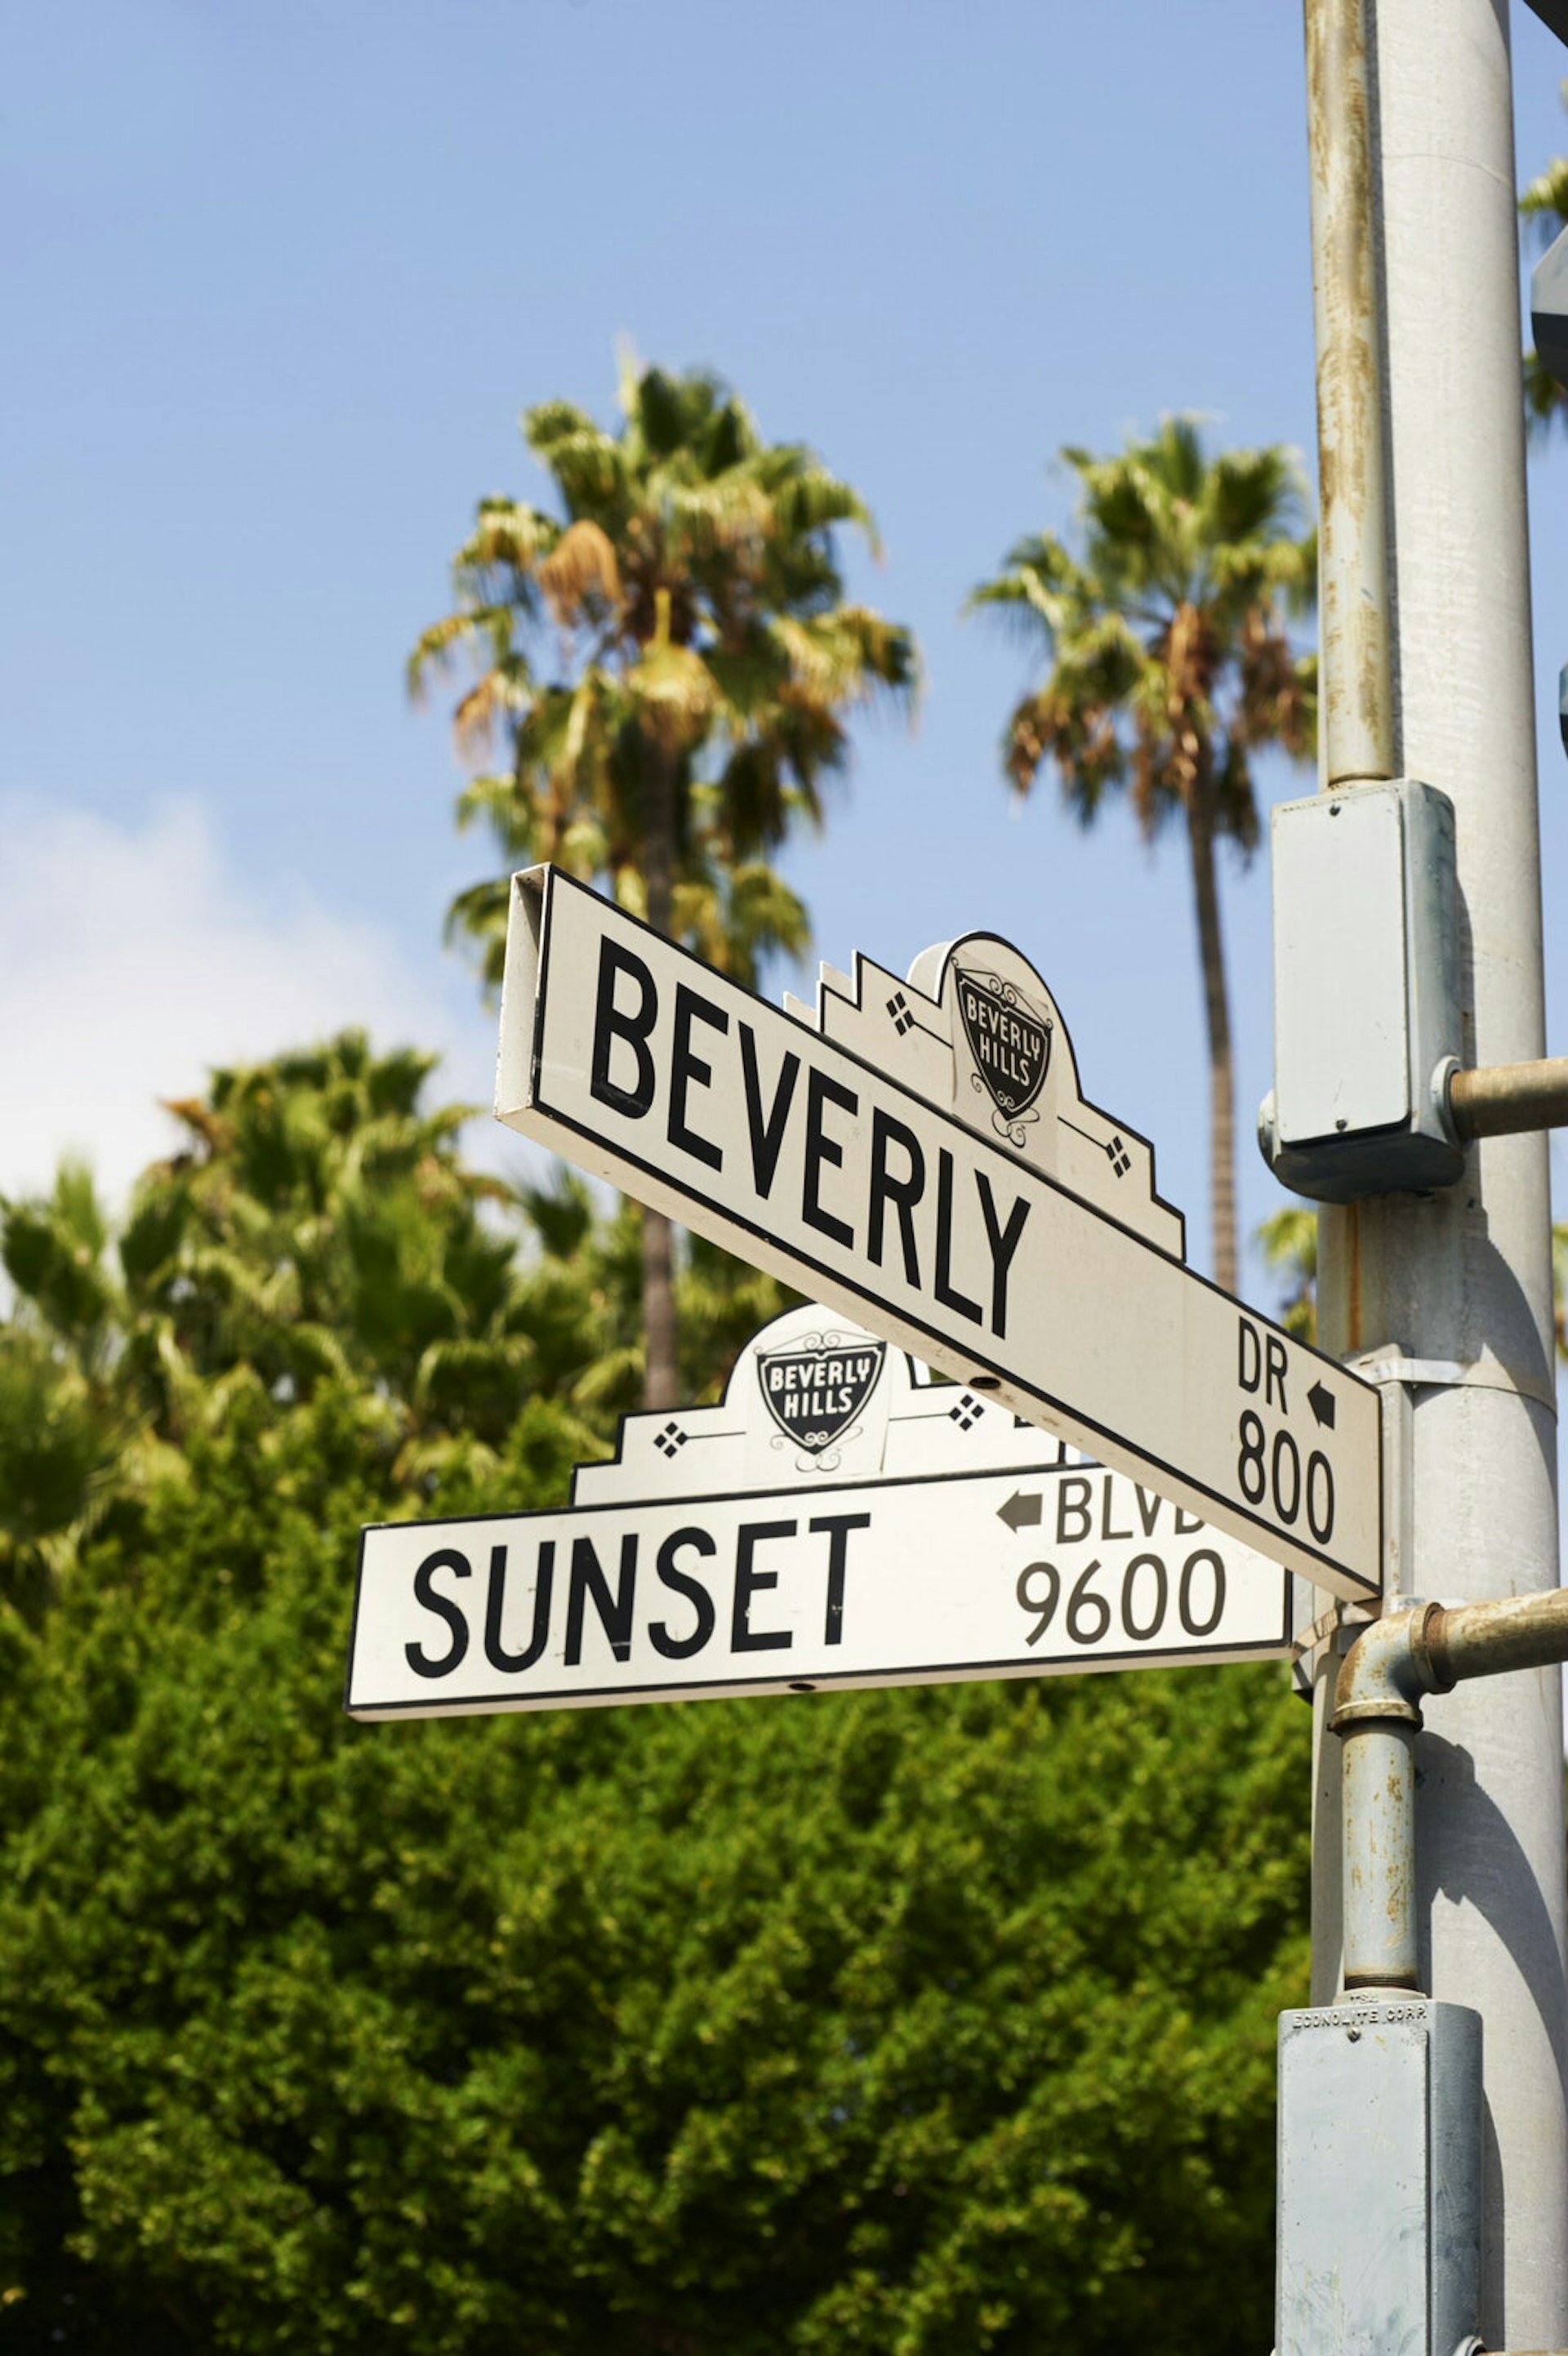 A street sign intersecting Beverly Drive and Sunset Boulevard © Simon Urwin / Lonely Planet